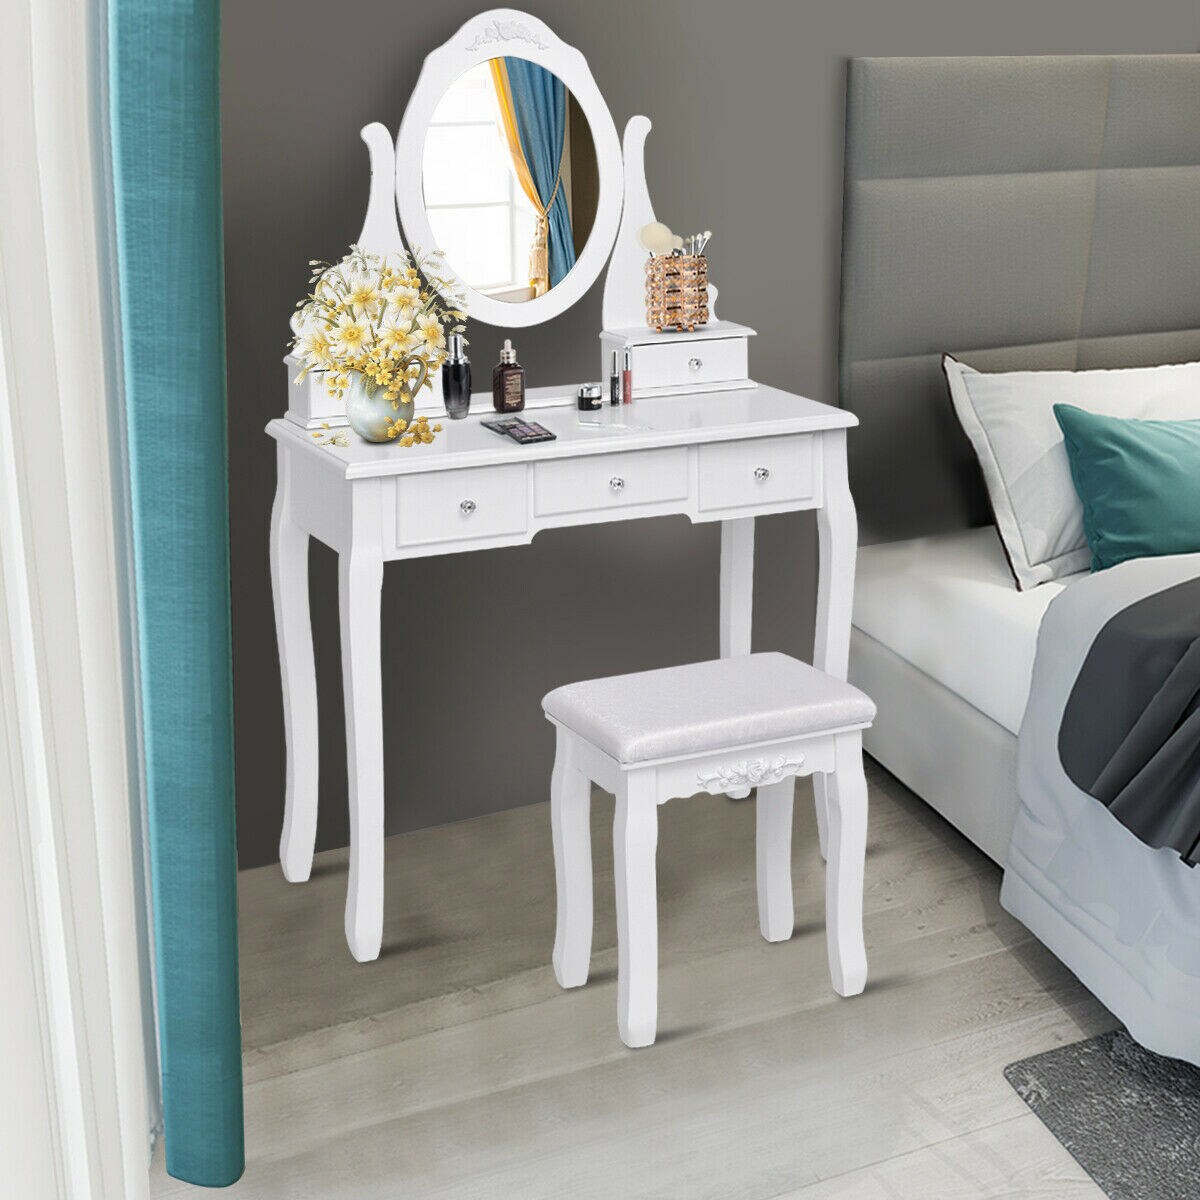 Gymax Bedroom Wooden Mirrored Makeup Vanity Set Stool Table Set White 5 Drawers